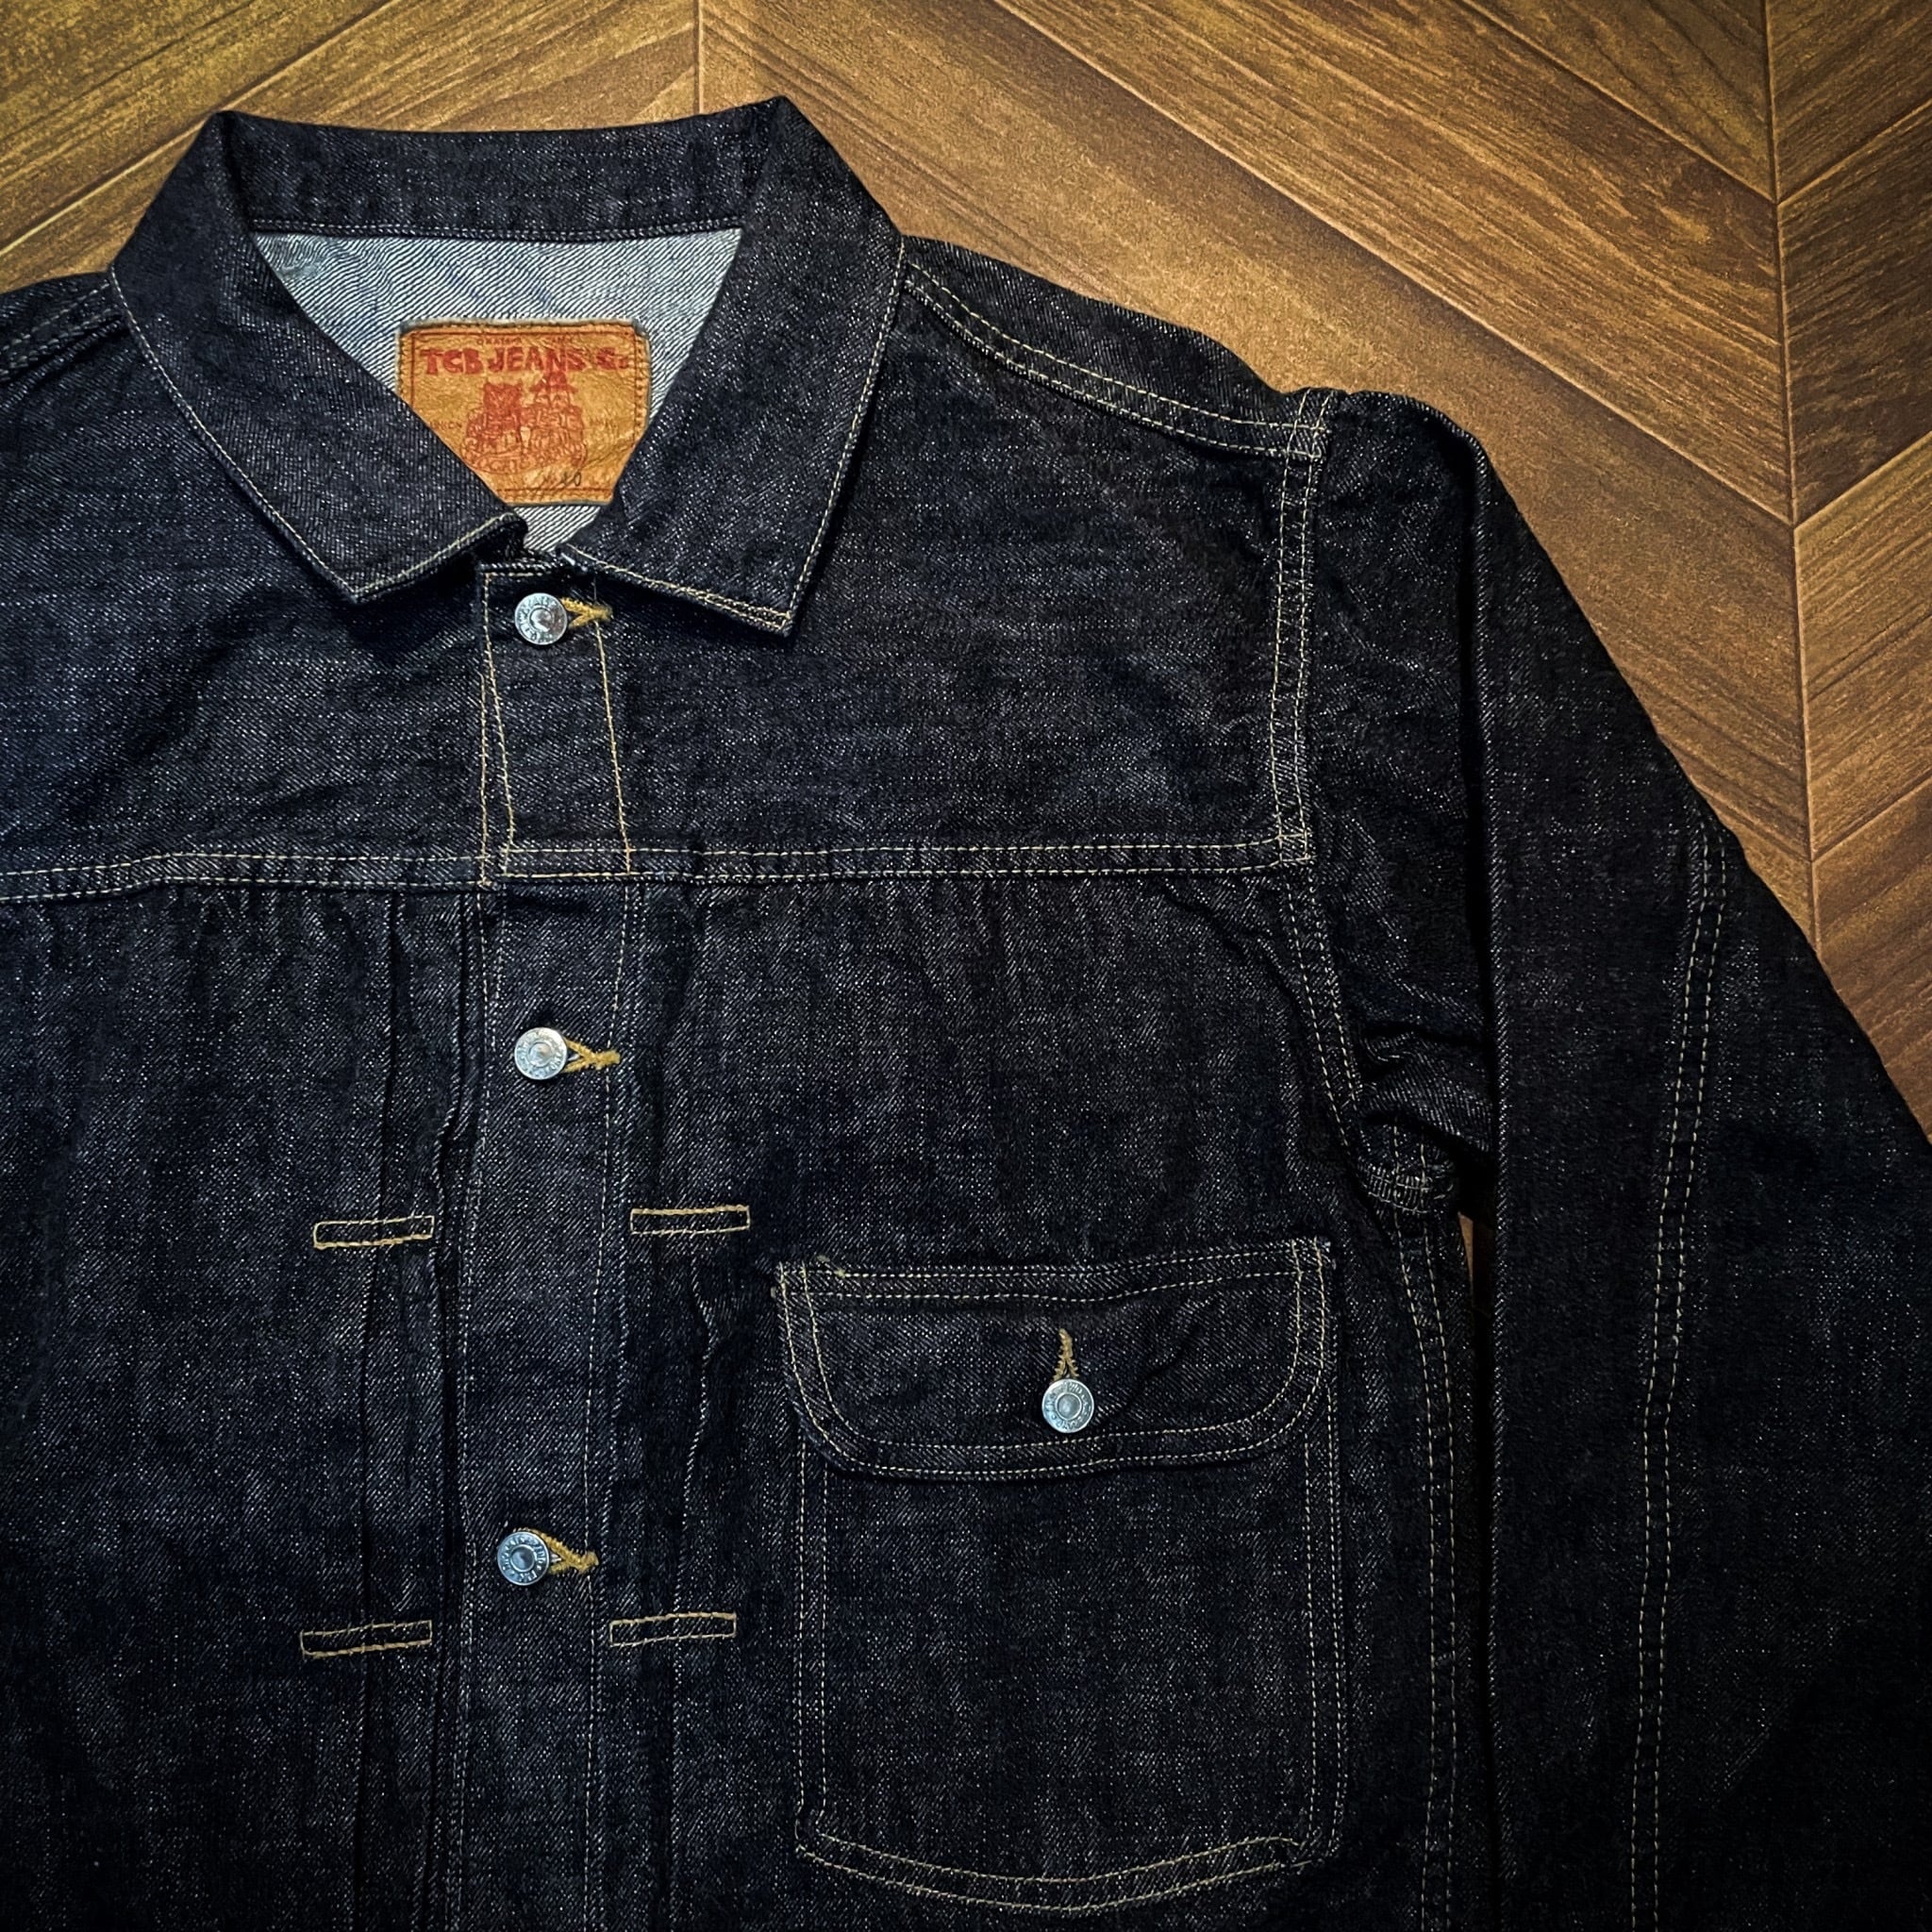 TCB jeans 20's Jacket | STYLE FACTORY & CO.